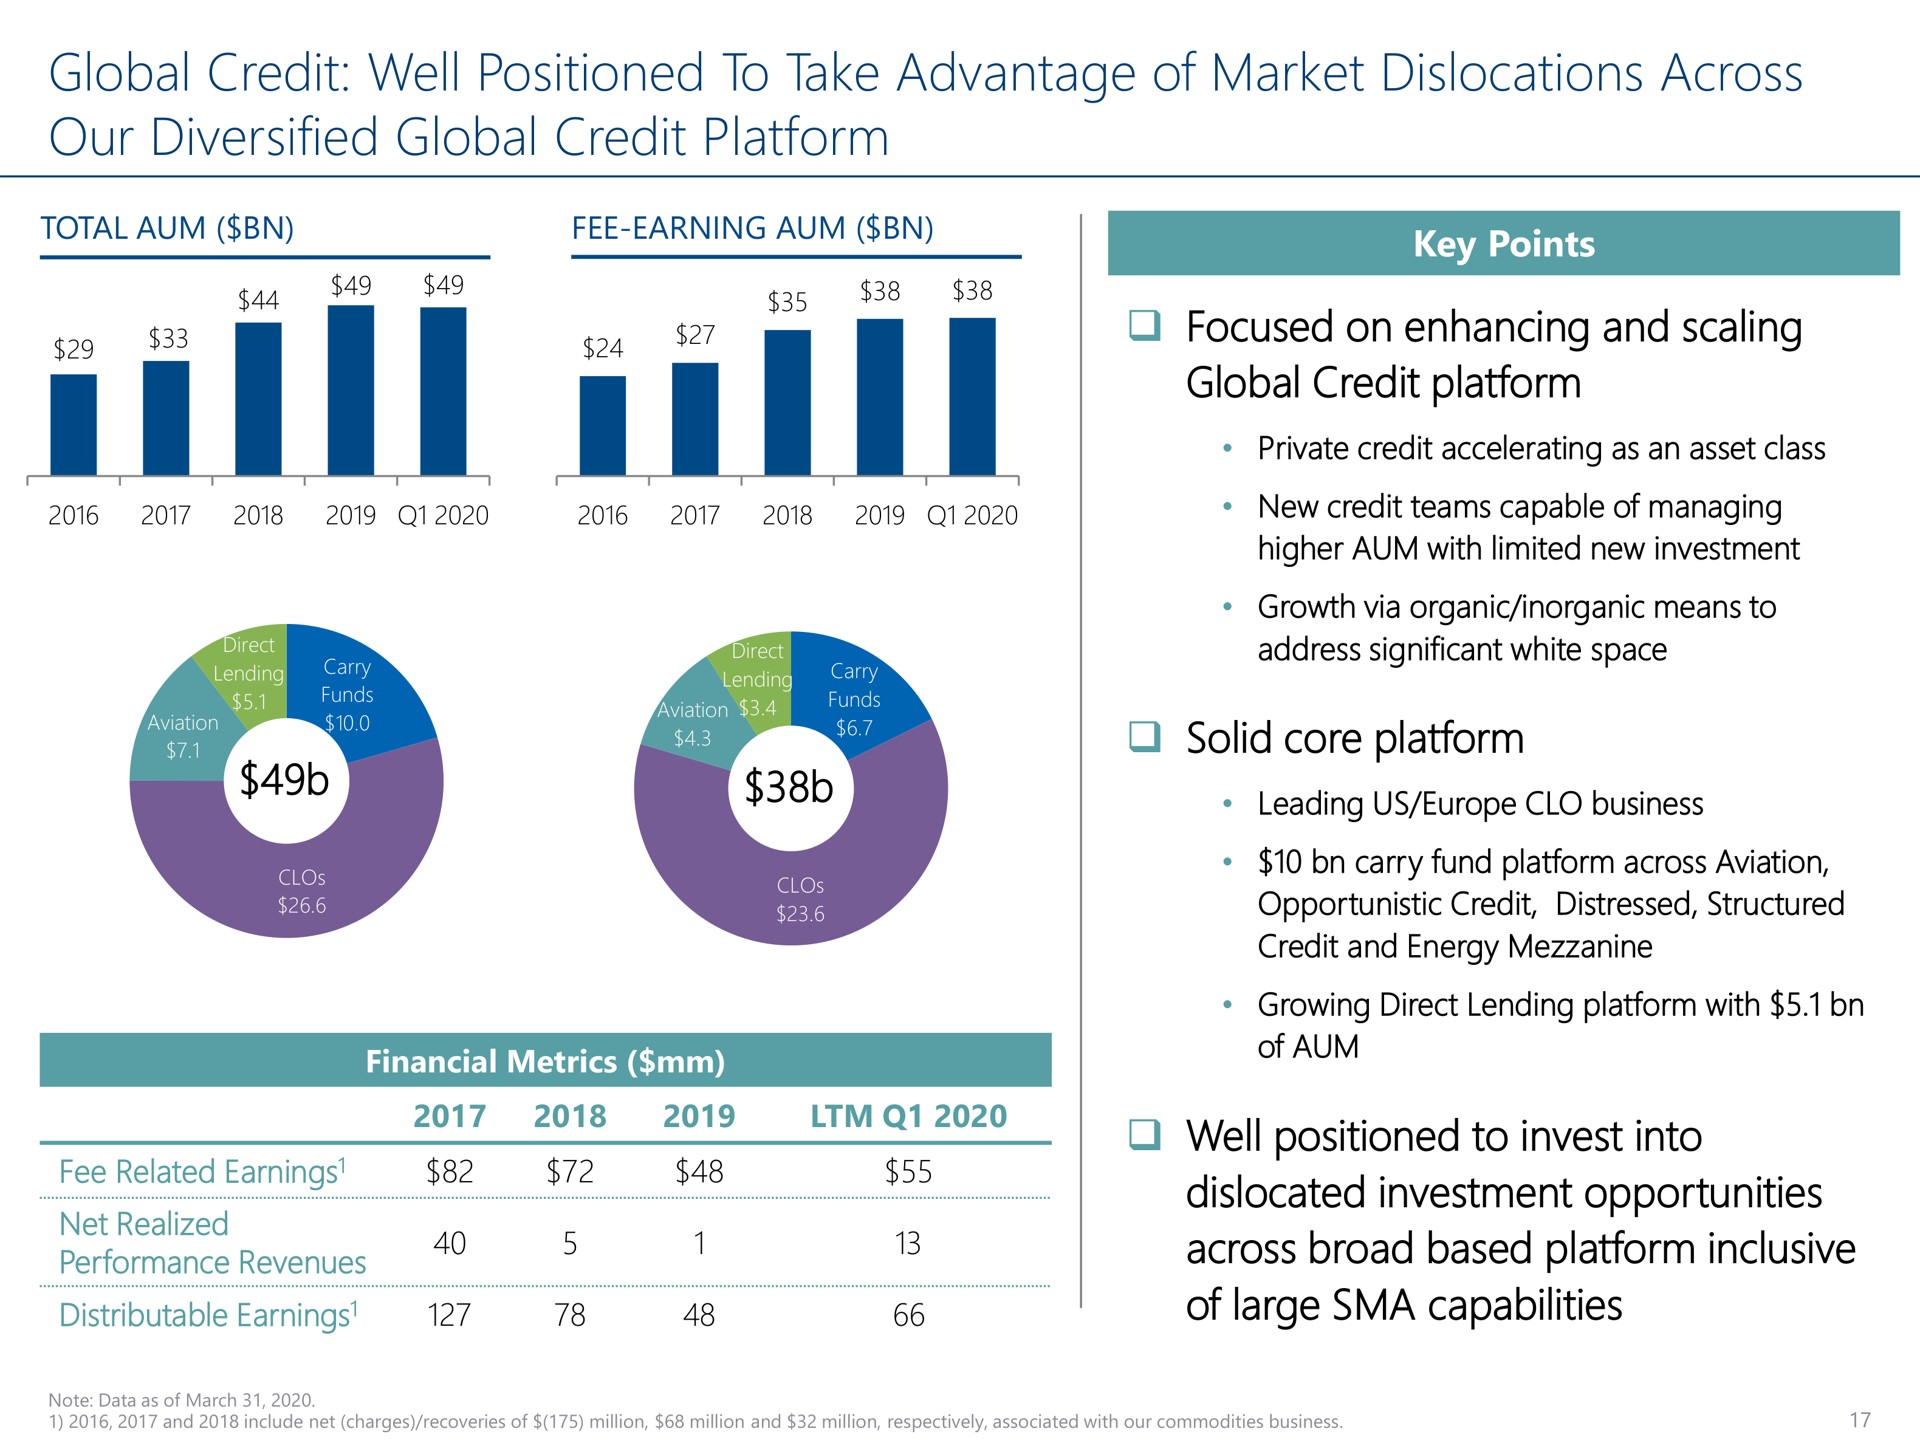 global credit well positioned to take advantage of market dislocations across our diversified global credit platform focused on enhancing and scaling global credit platform solid core platform well positioned to invest into dislocated investment opportunities across broad based platform inclusive of large sma capabilities distributable earnings | Carlyle